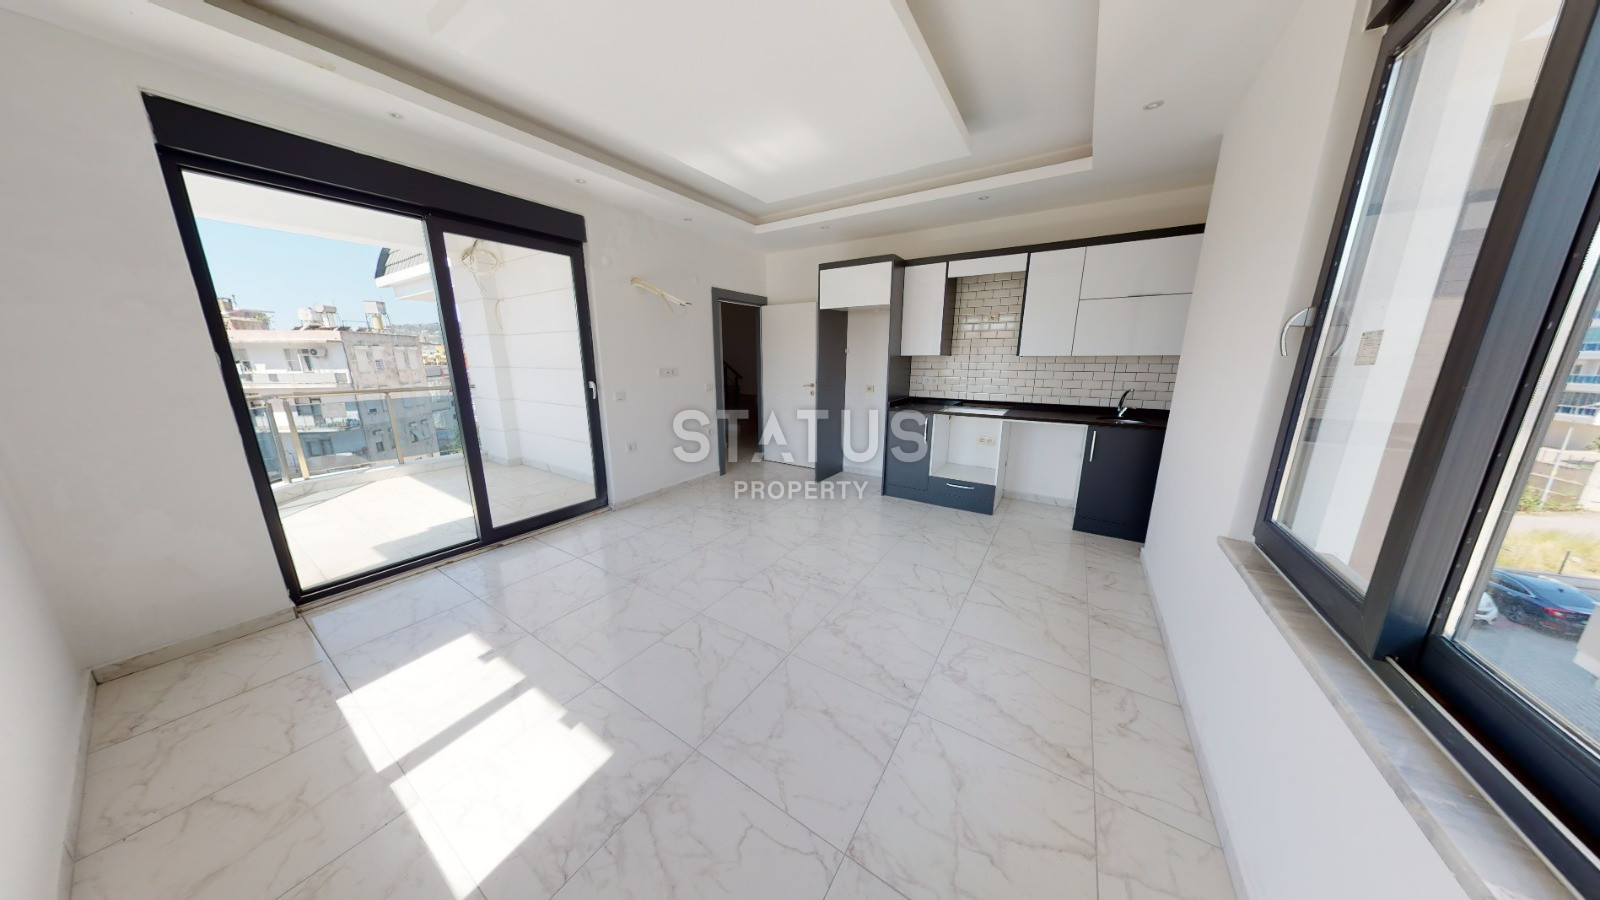 Duplex apartment in the central part of Alanya with a sea view. 120m2 фото 1